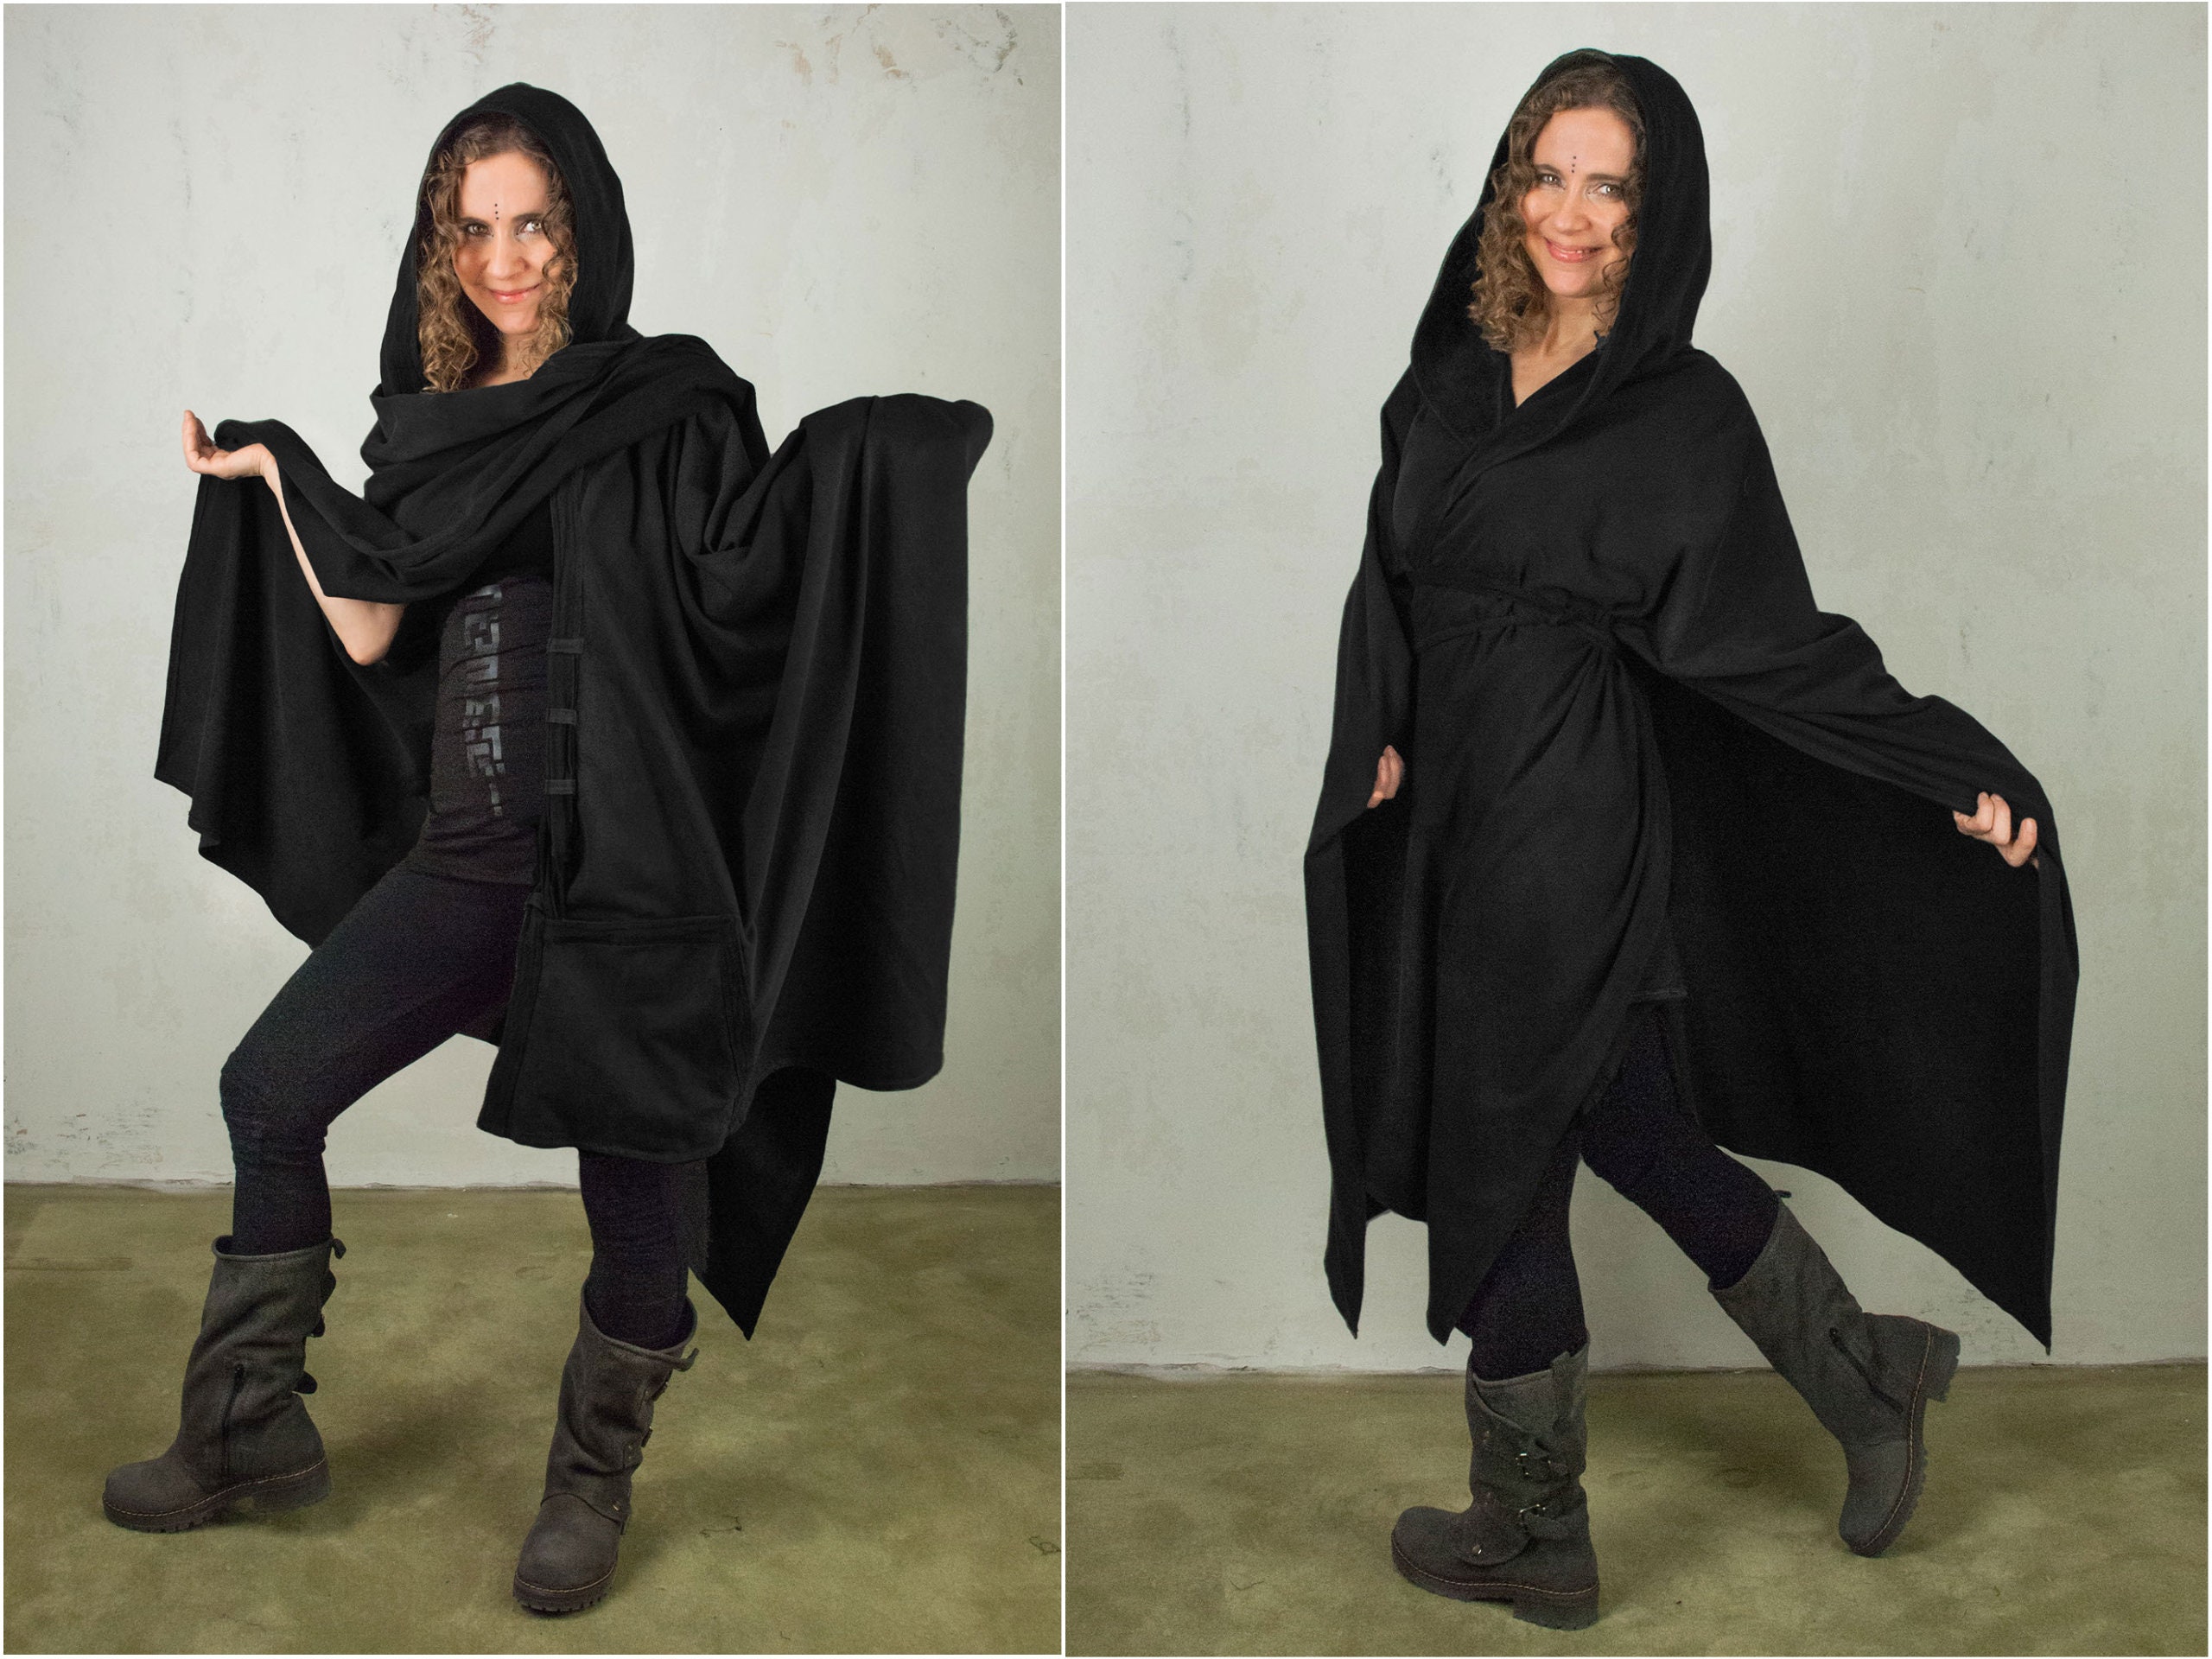 Star Wars Sith Women's Hooded Cape : Target